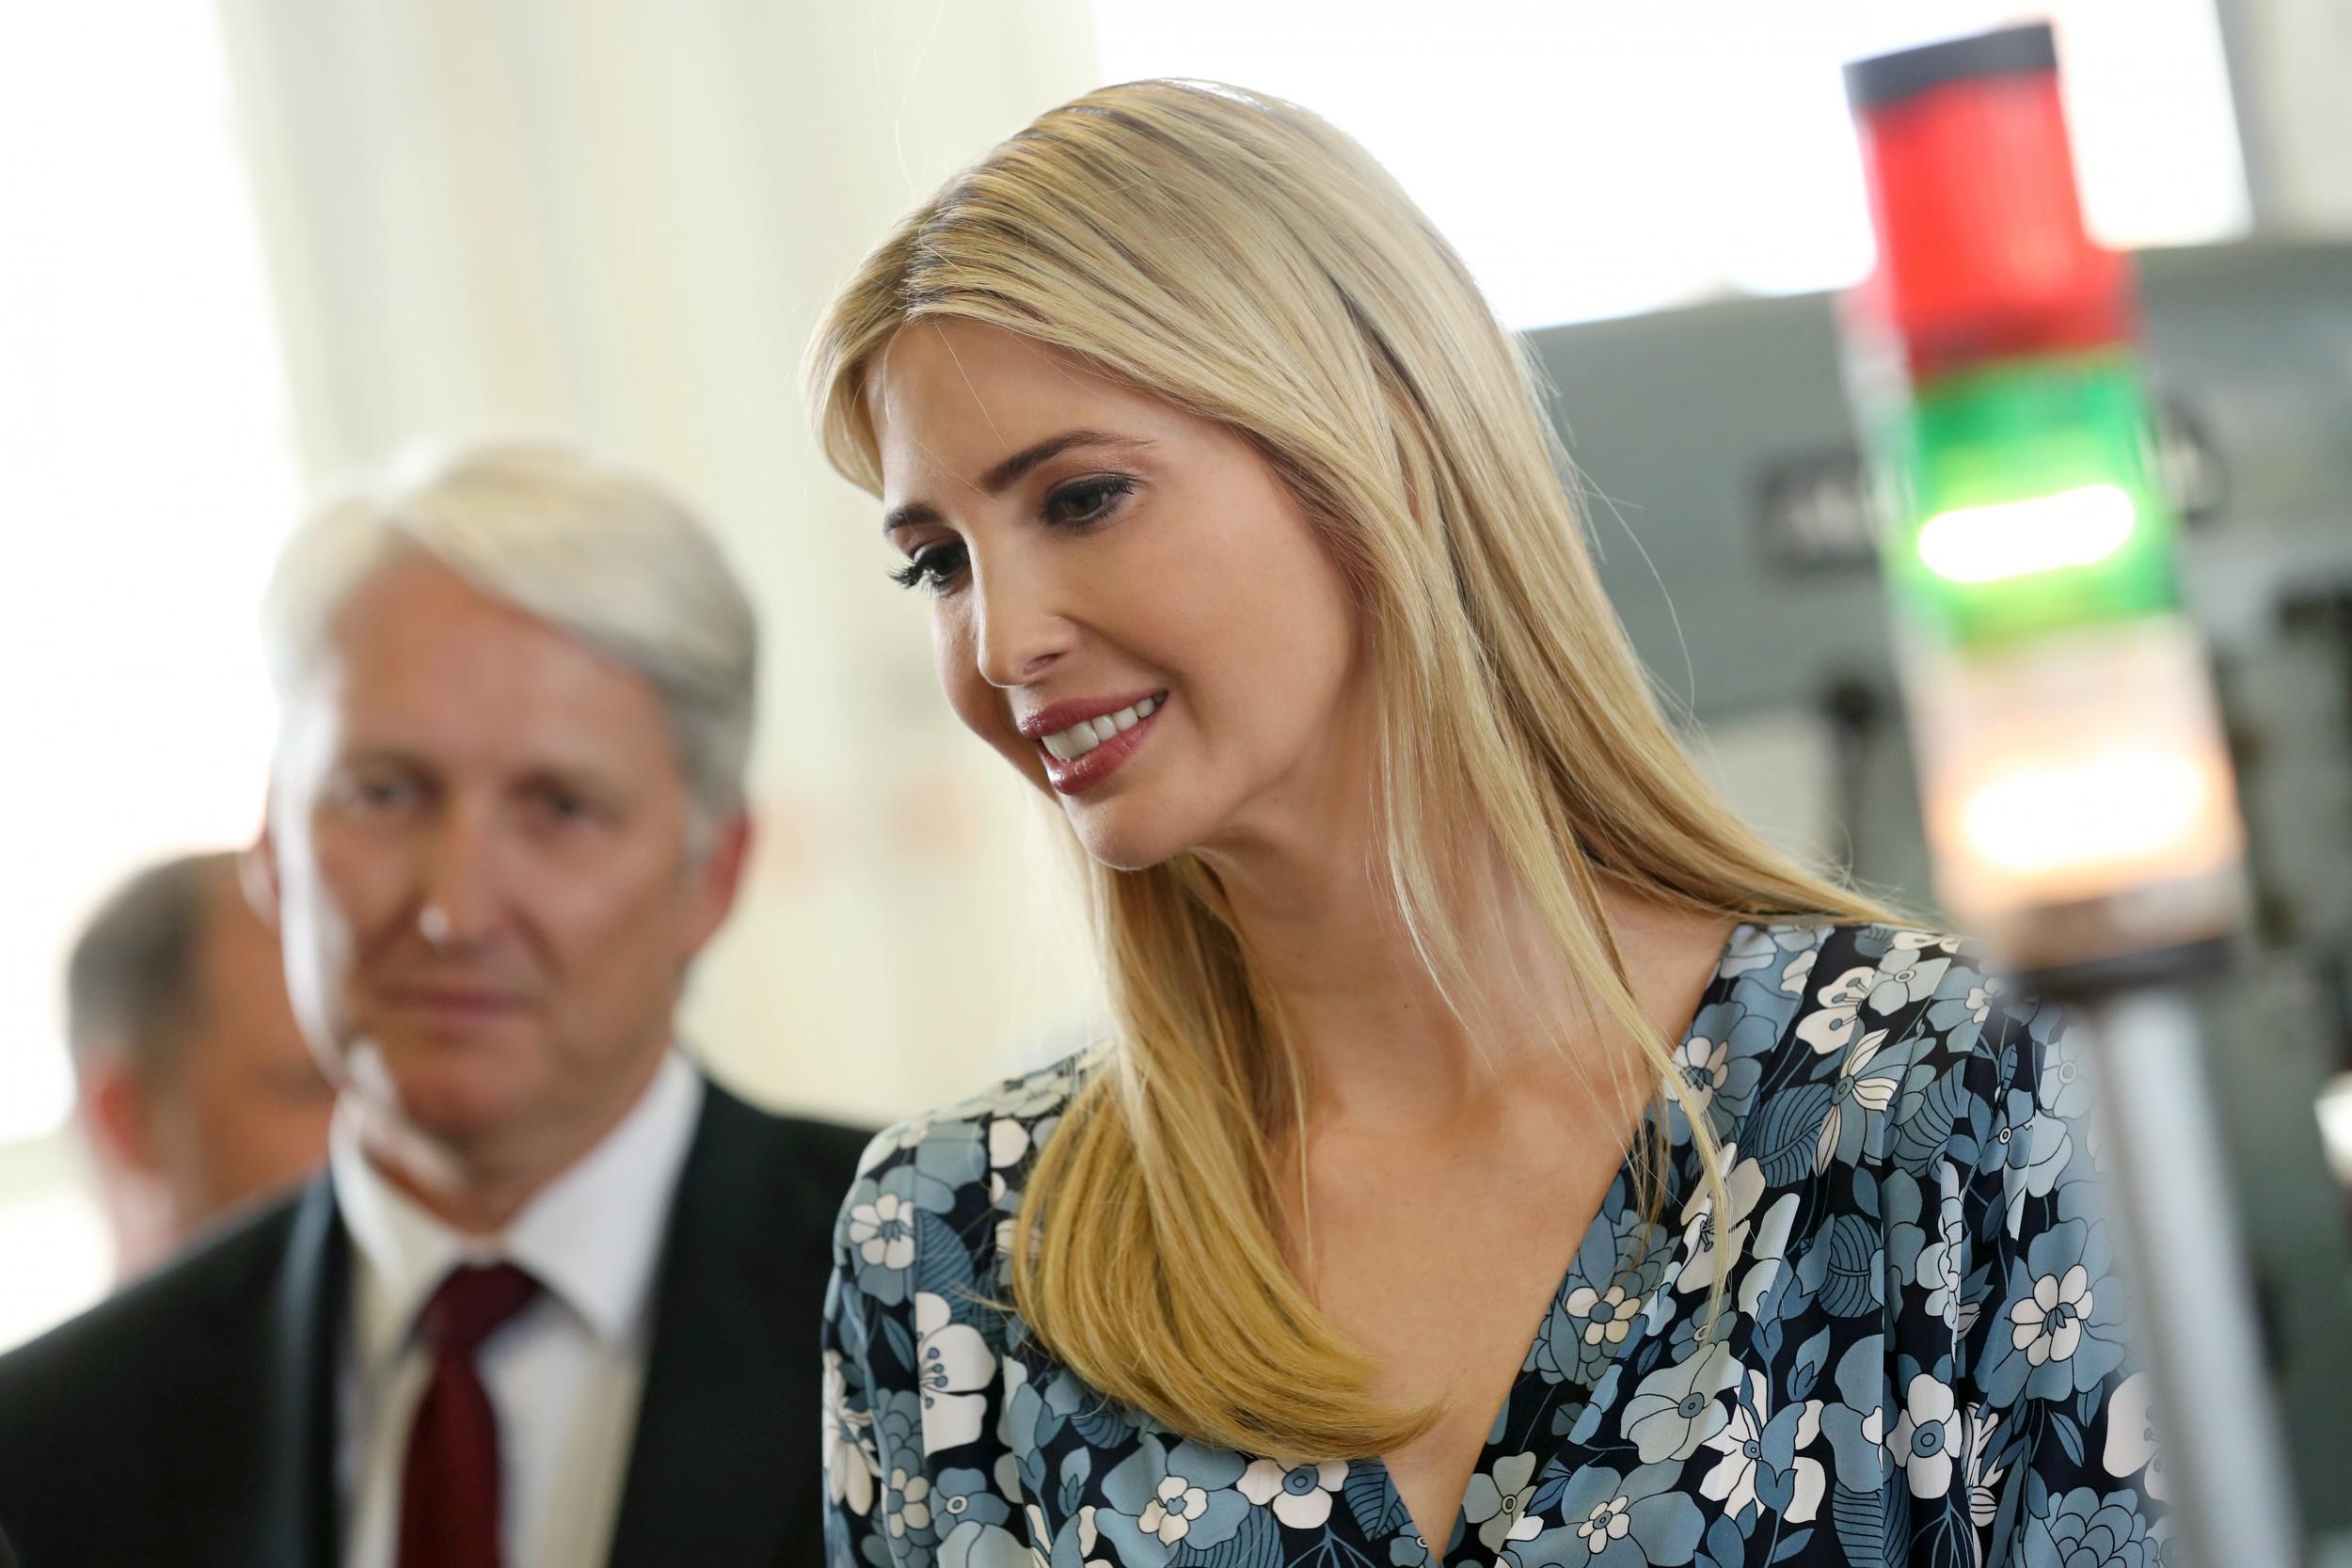 Ivanka Trump on a recent visit to Berlin, Germany